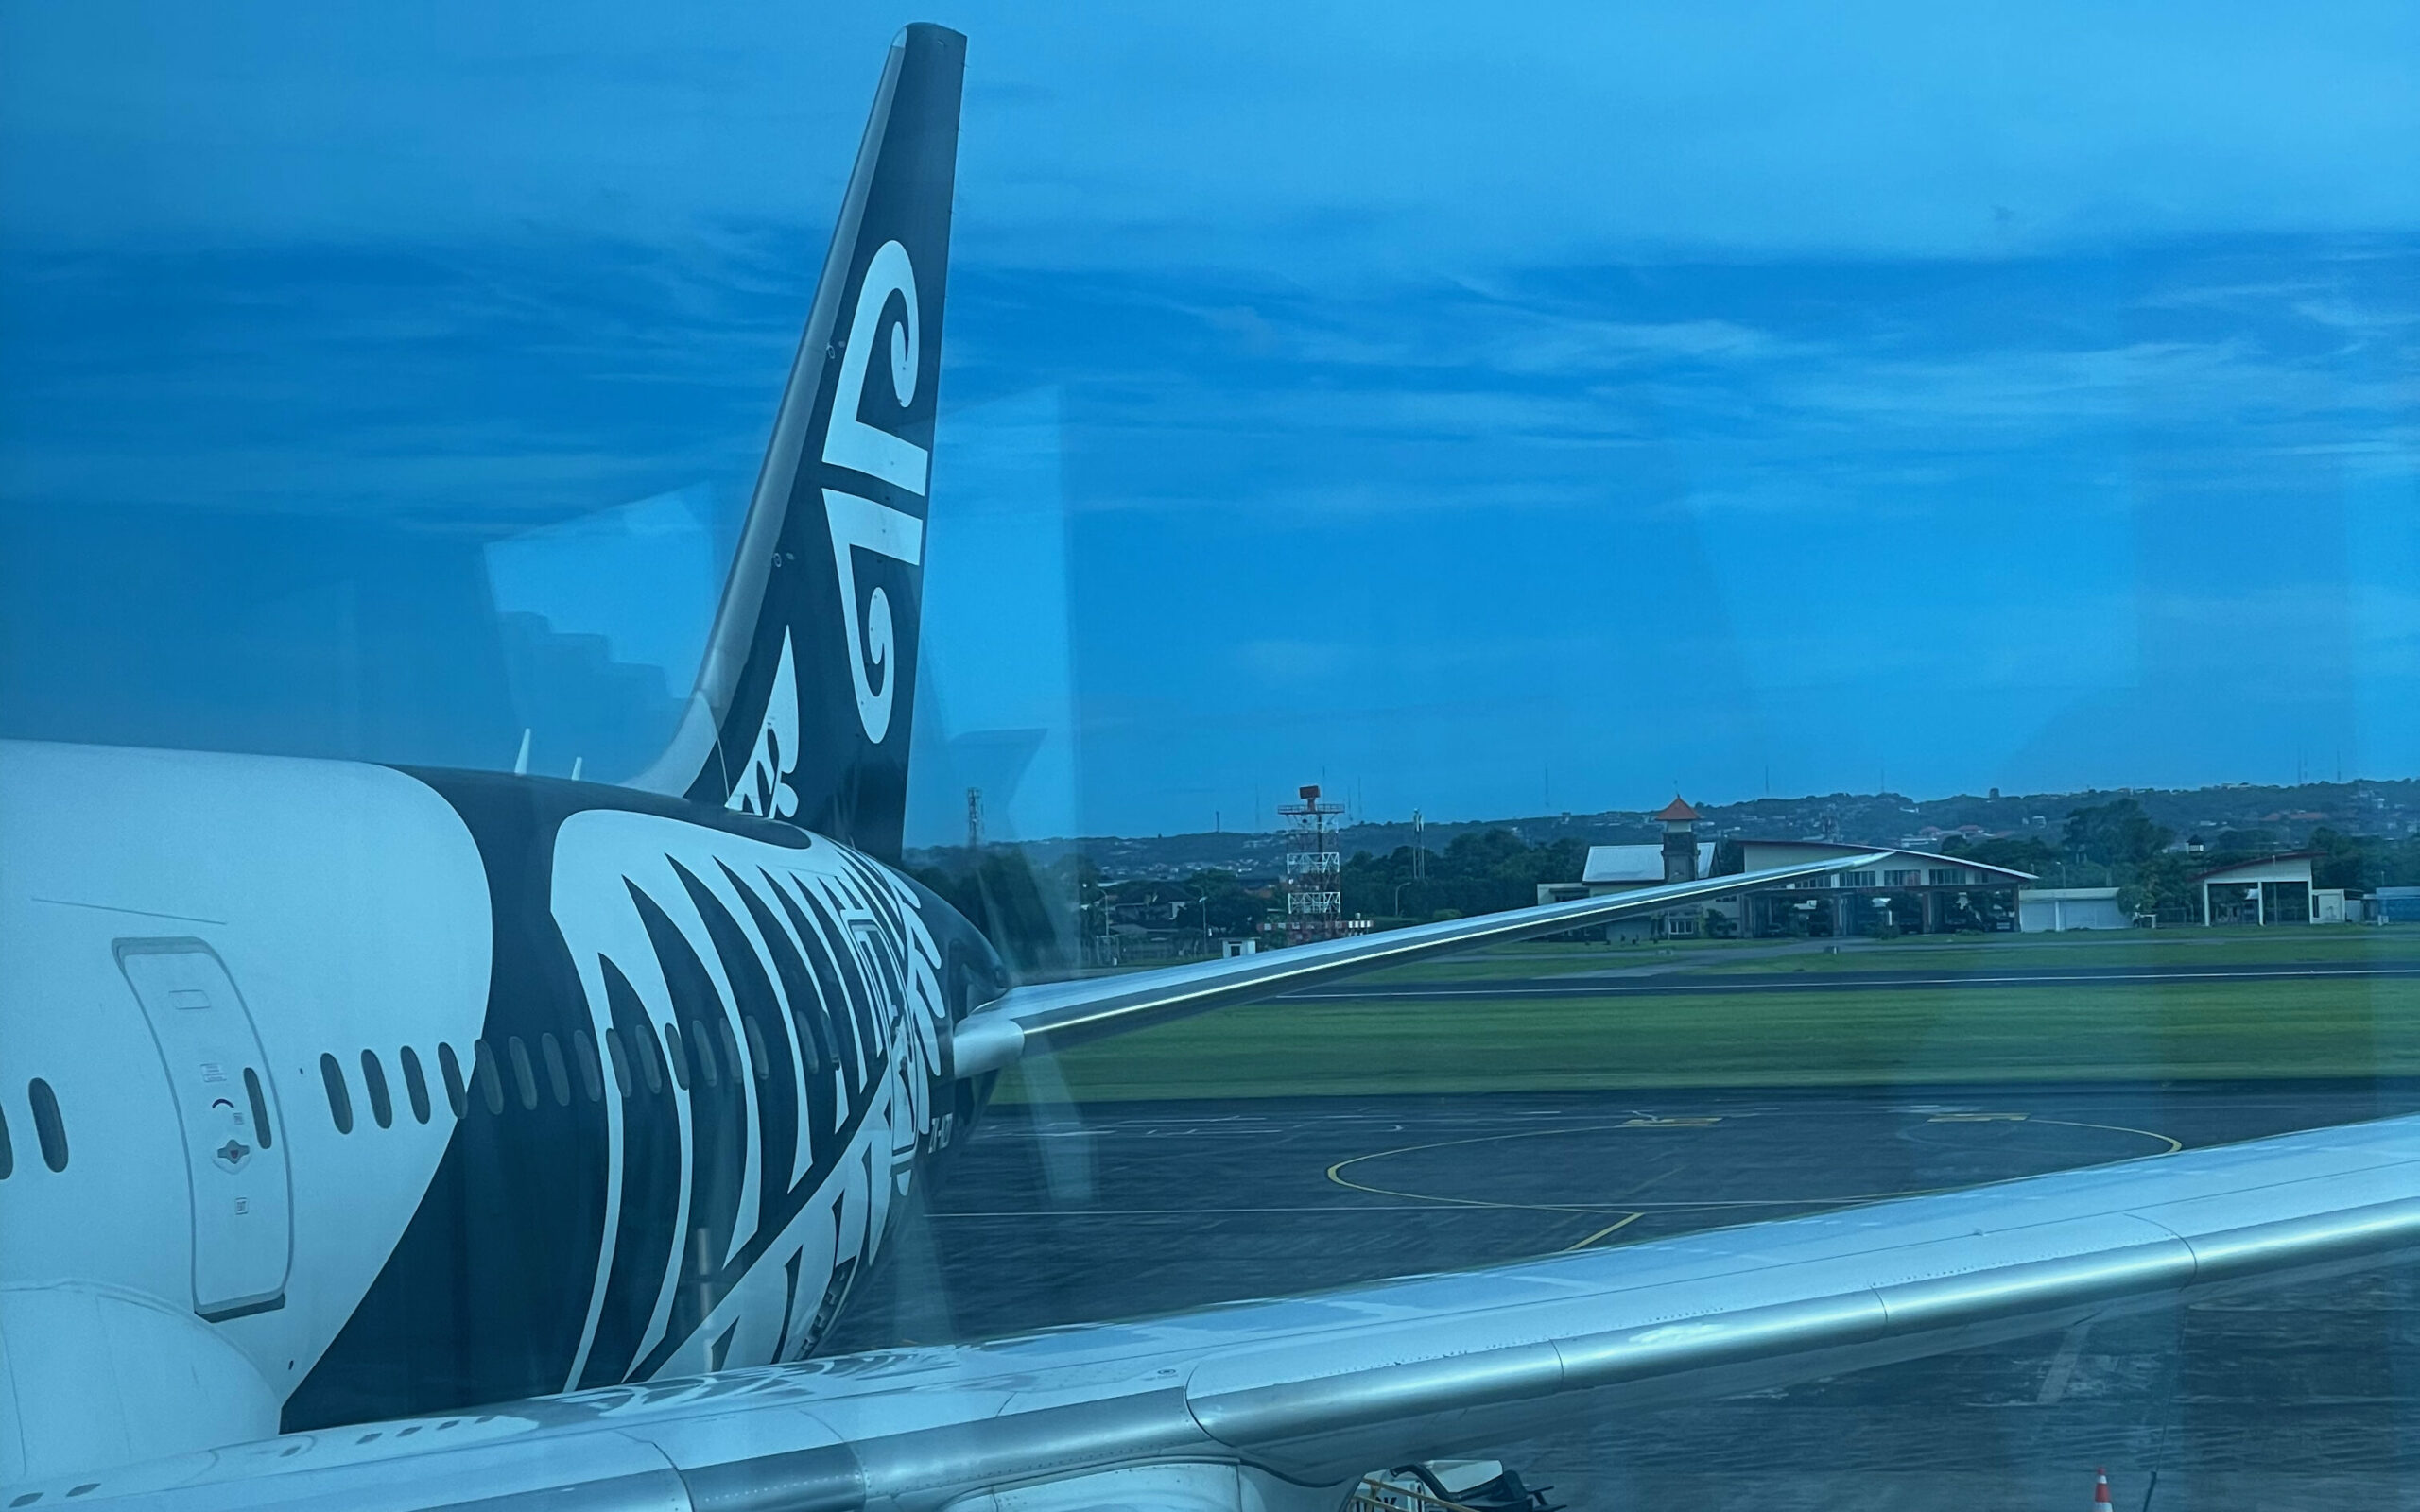 Air New Zealand tail fin of a parked aircraft.